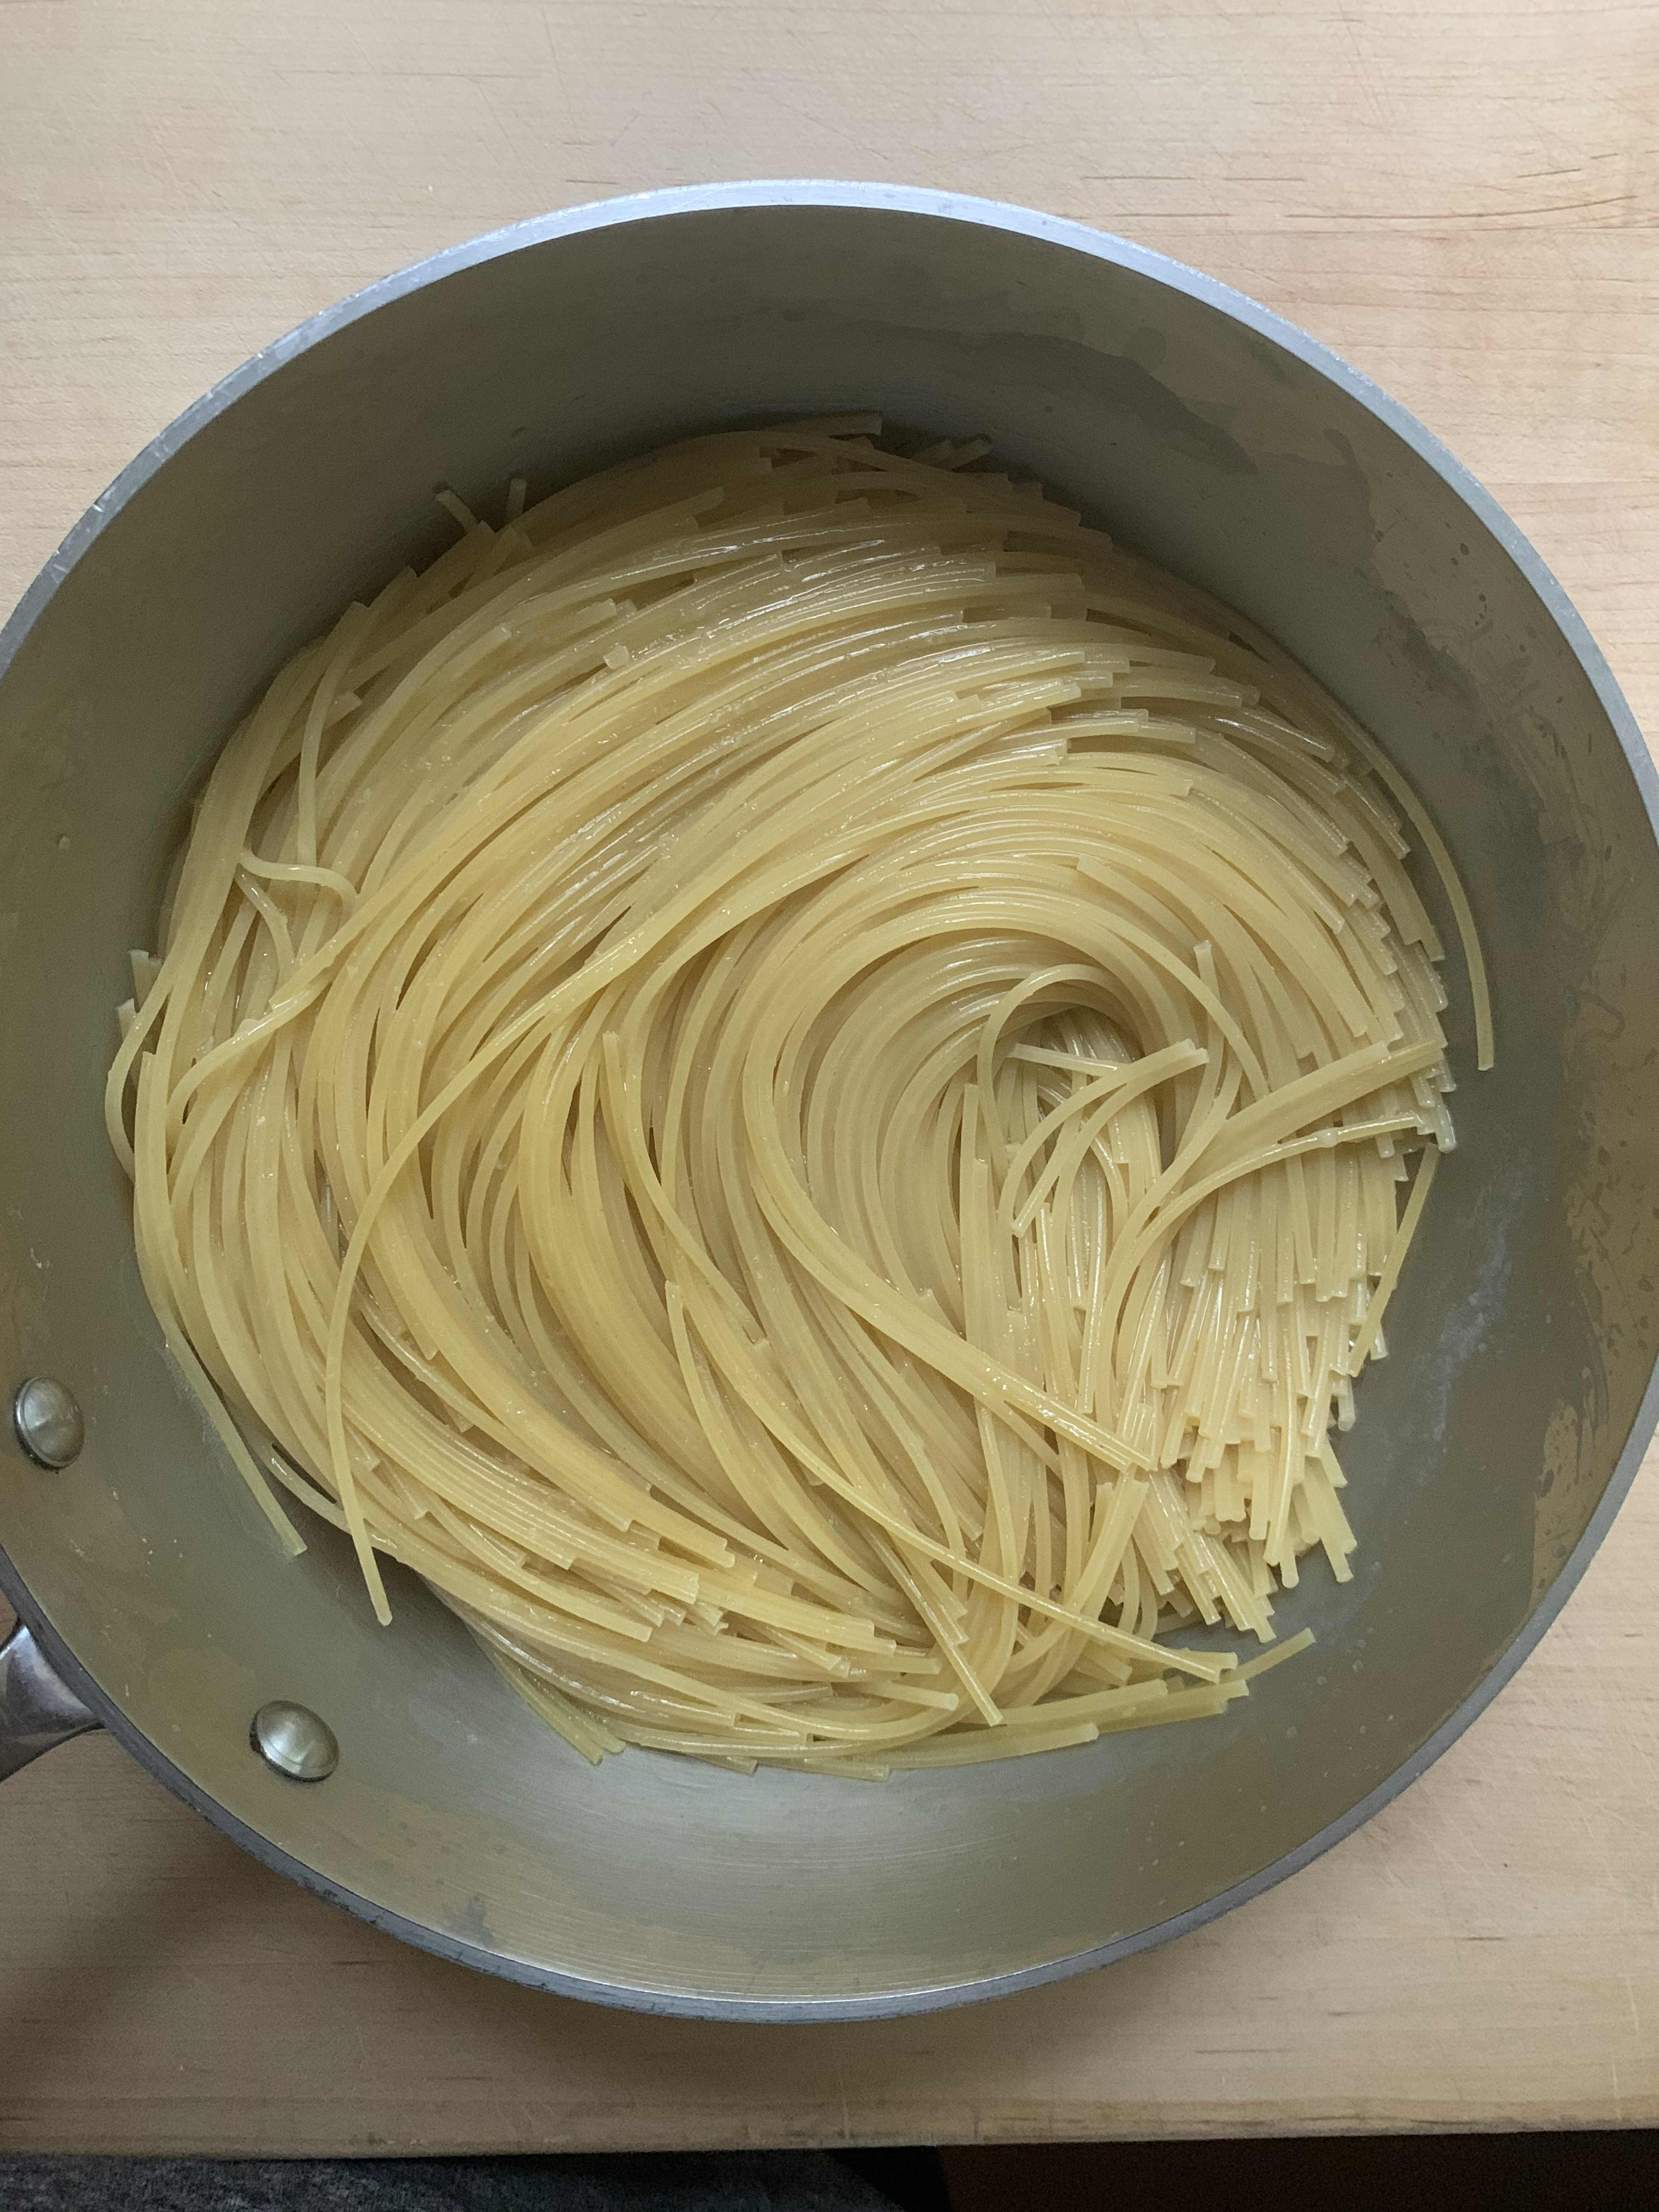 We Tried 5 Methods for Cooking Dried Pasta and the Winner Was a Surprise |  Kitchn